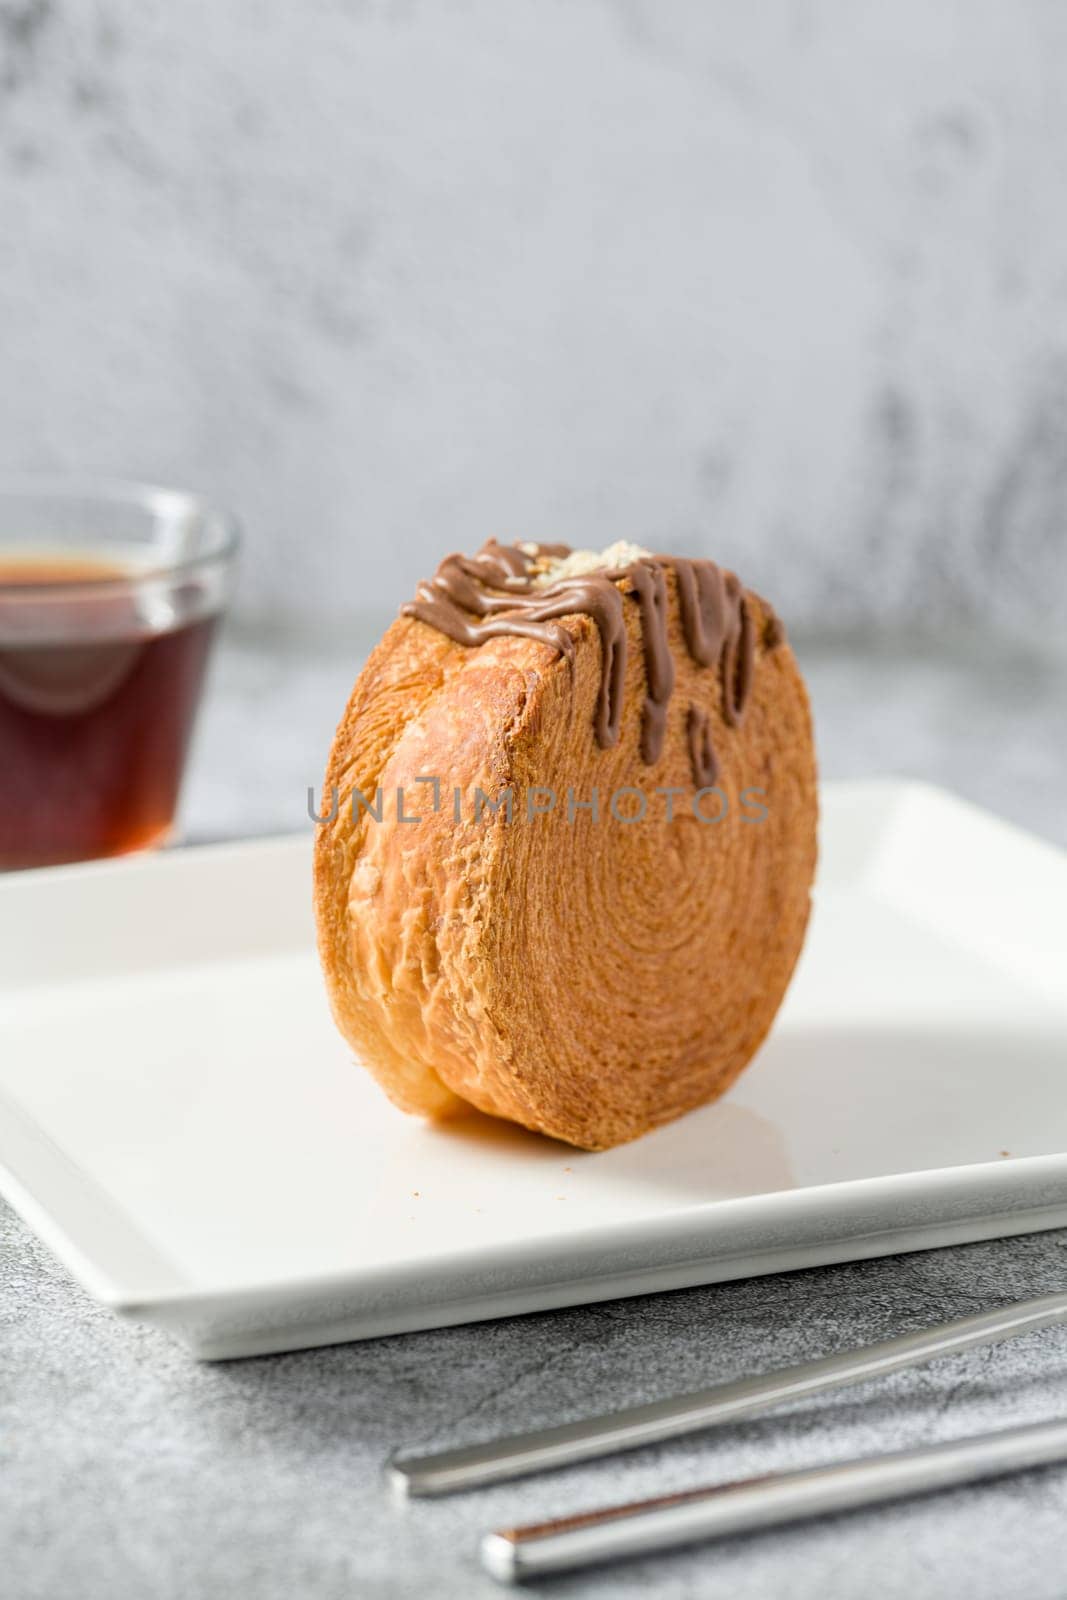 Chocolate New York roll or round croissant with tea on stone table by Sonat